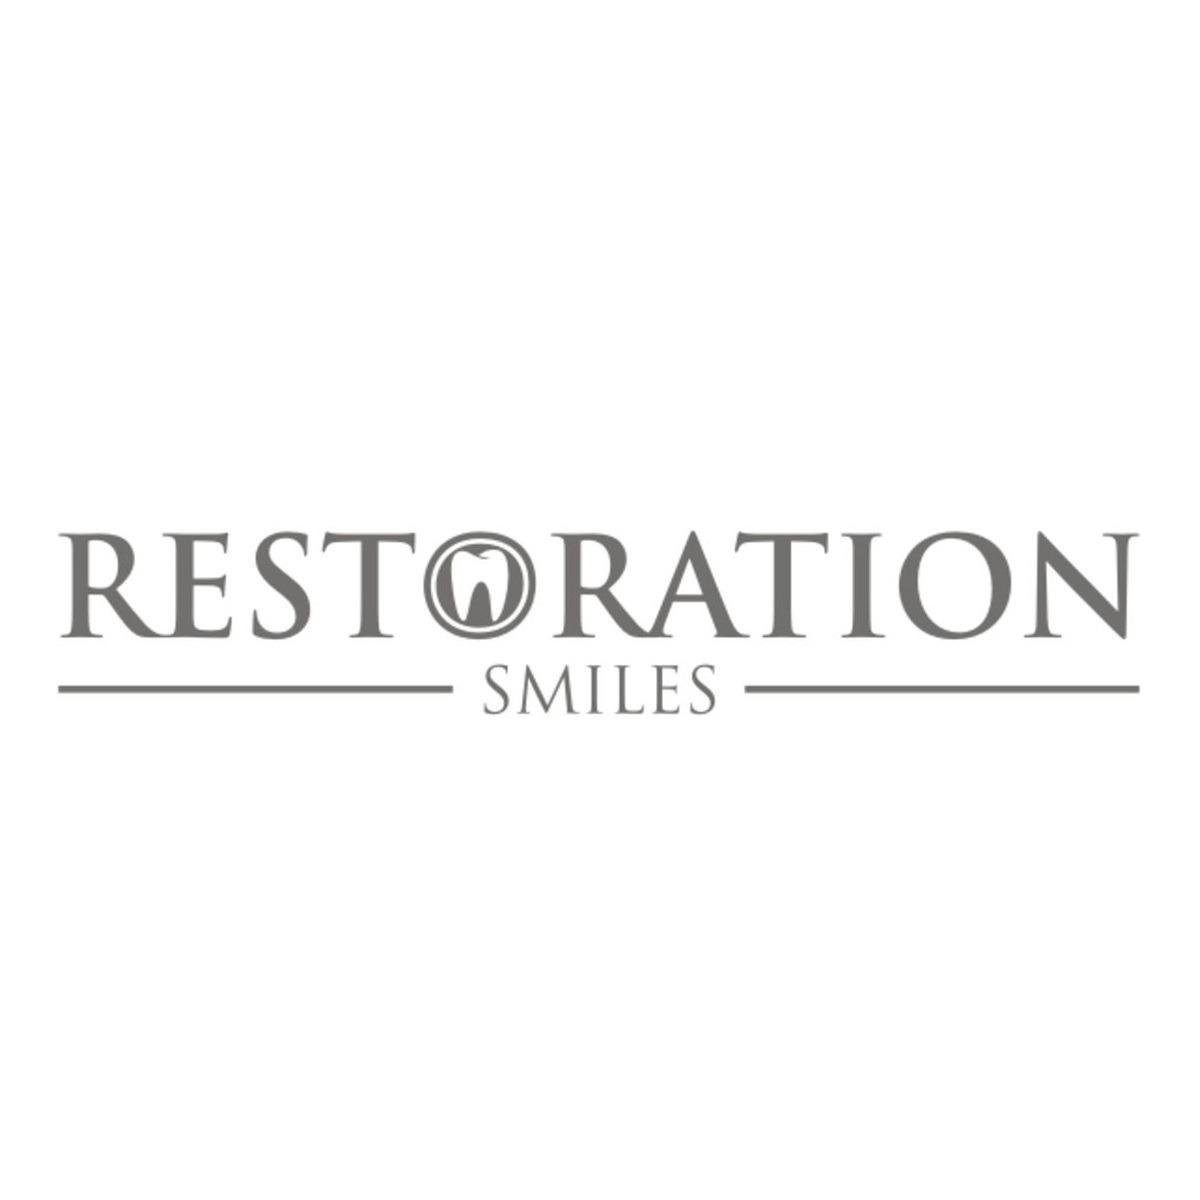 Restoration Smiles - Dentist Tomball - Tomball, TX 77375 - (713)623-1122 | ShowMeLocal.com